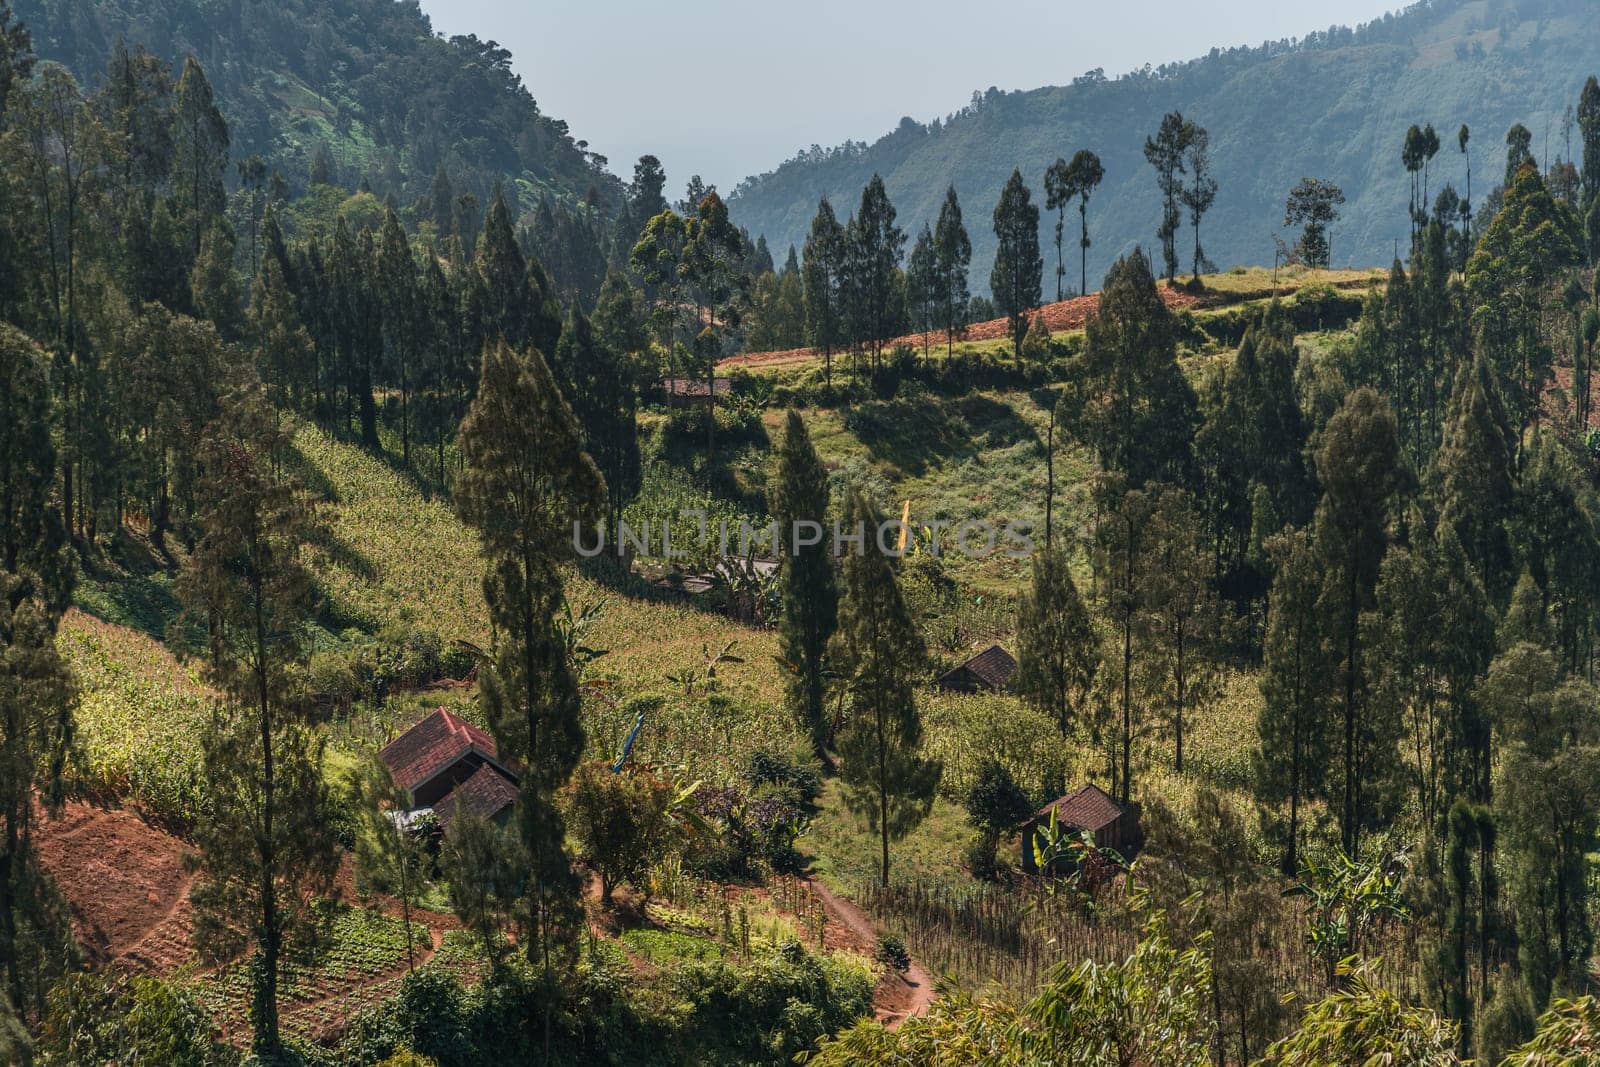 Landscape view of balinese garden and forest vegetation by Popov